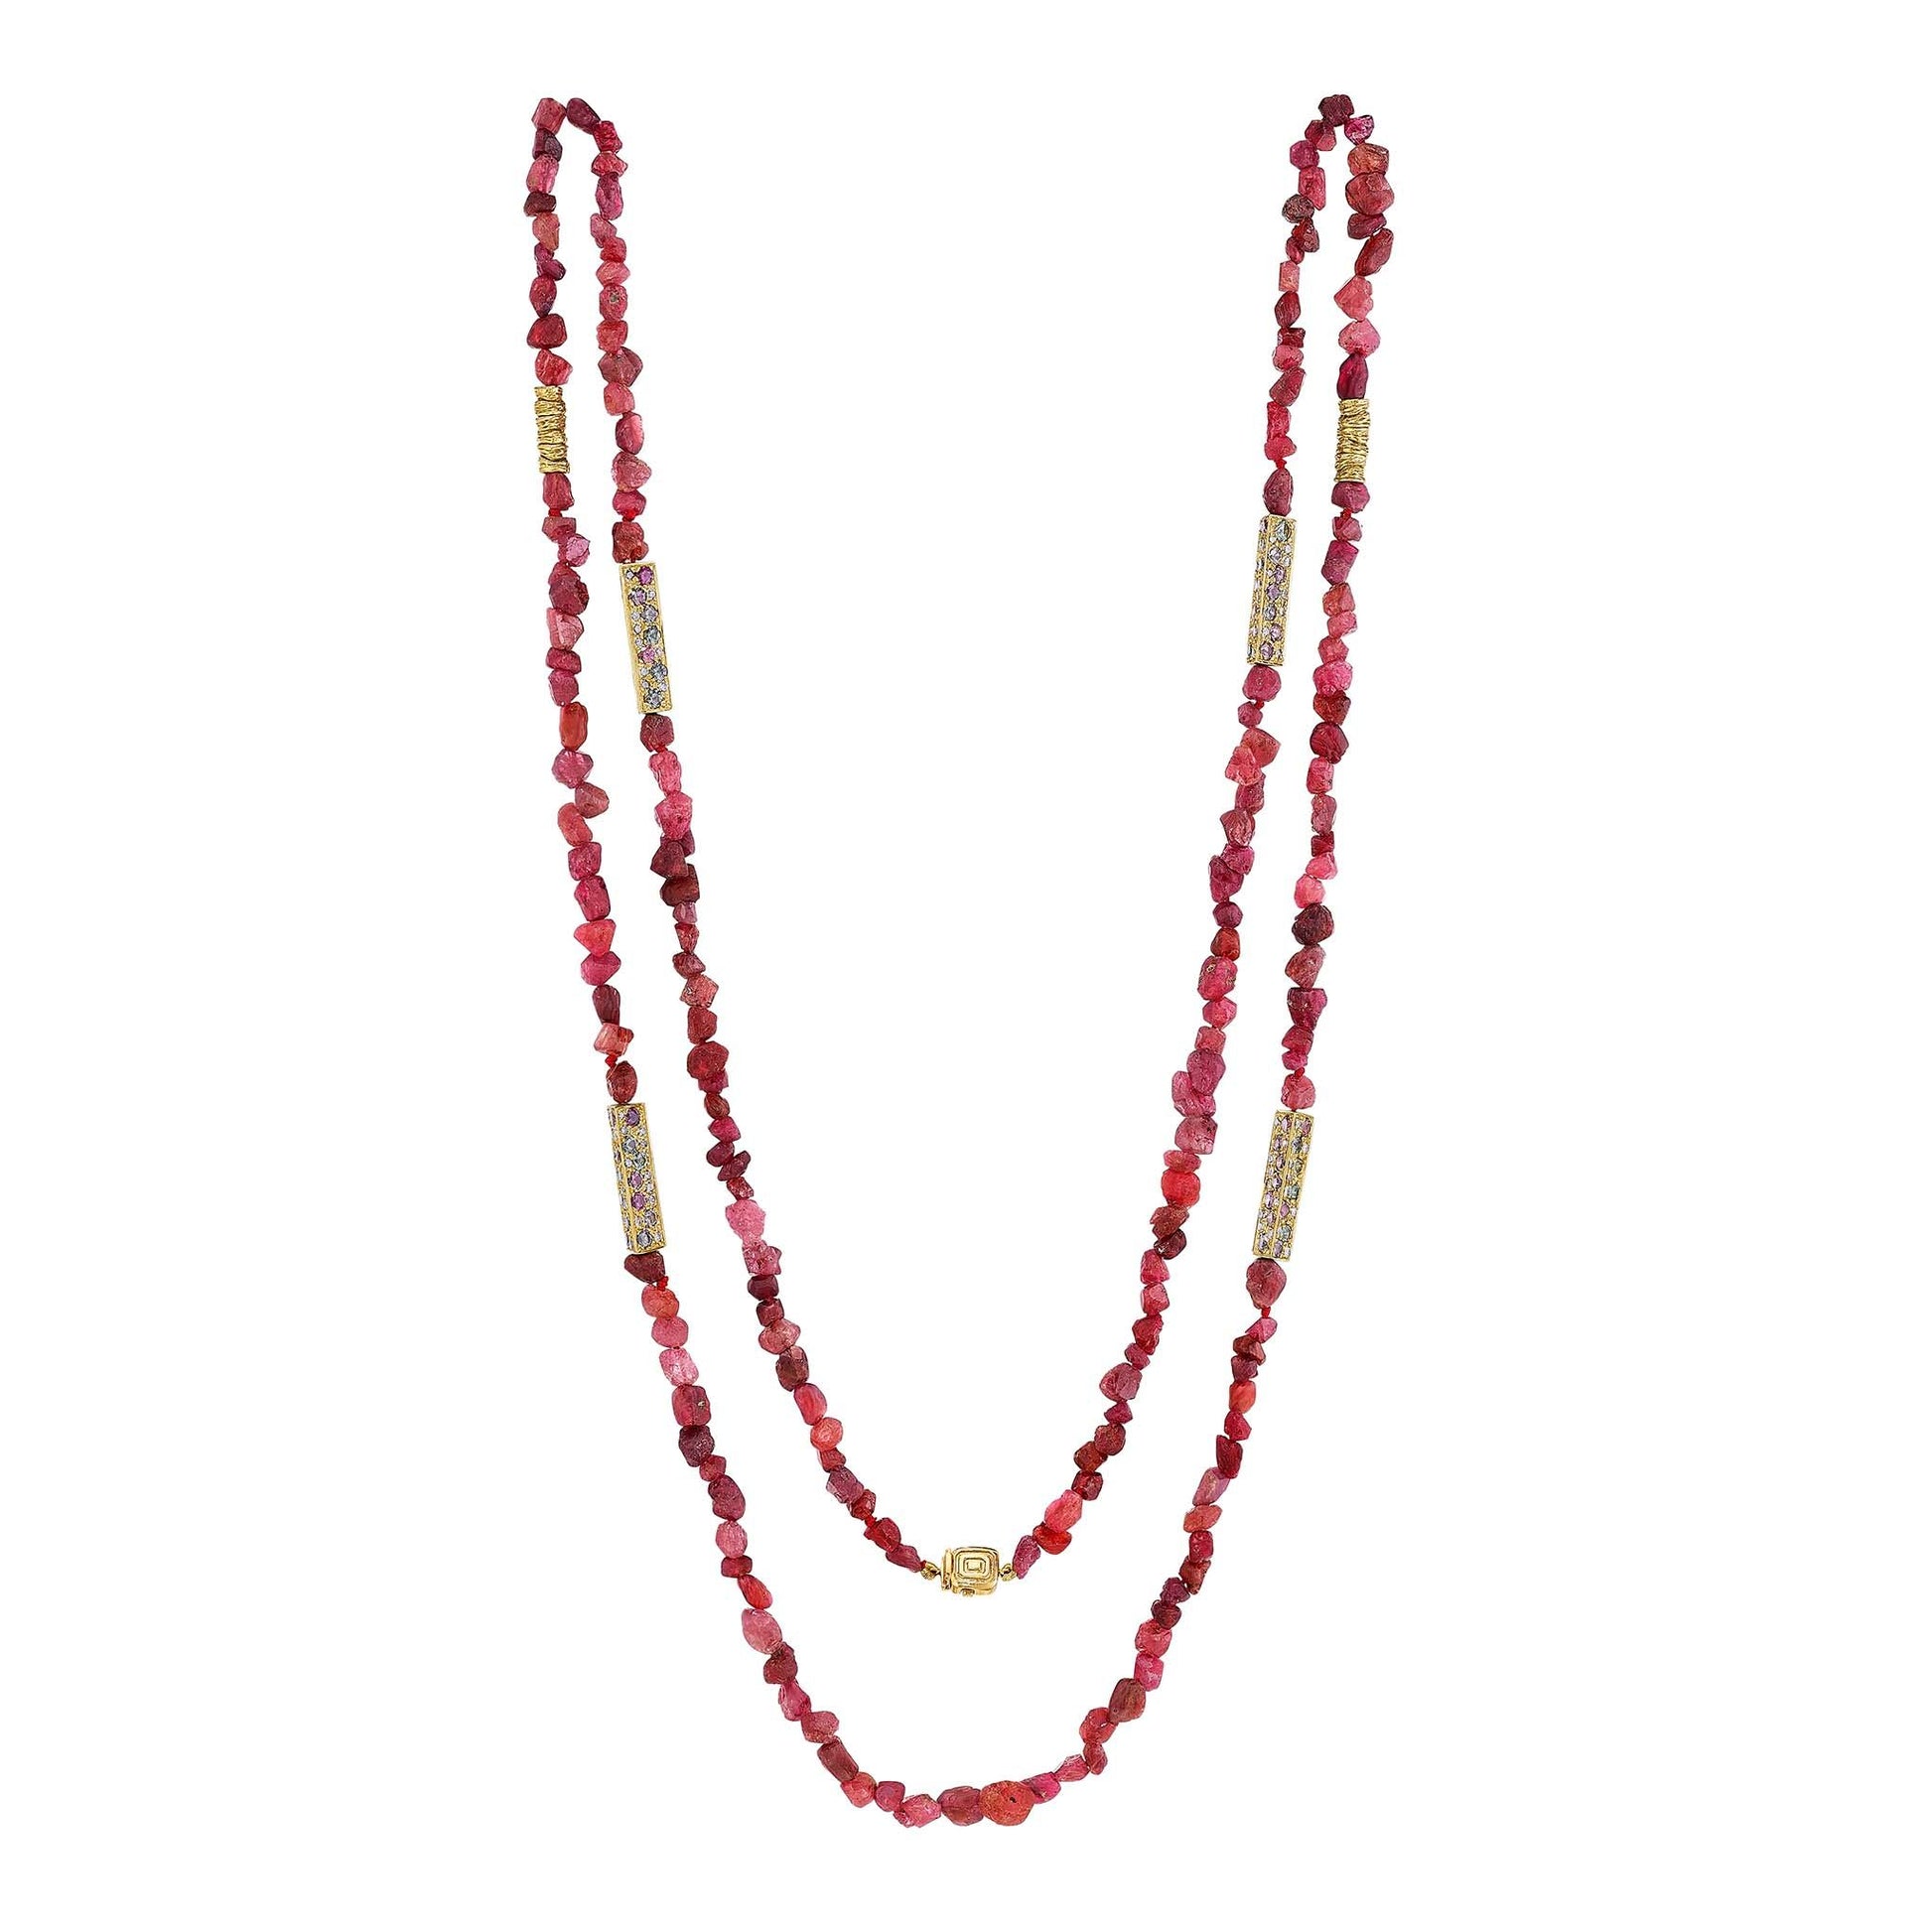 Mimi So Wonderland African Red Spinel Bead Necklace